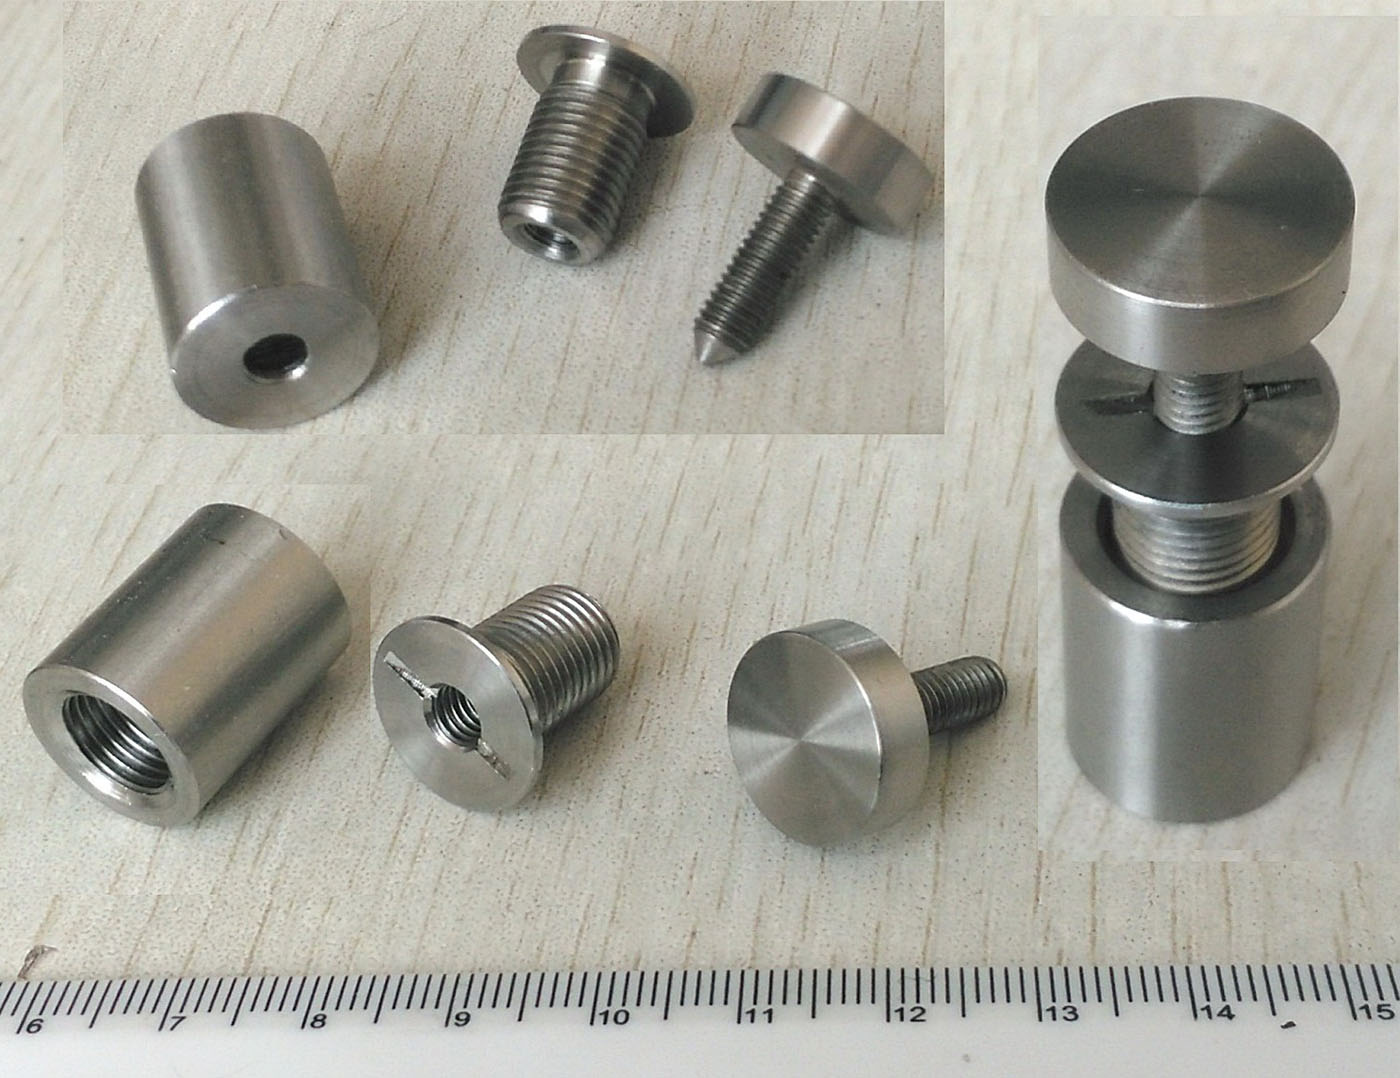 New Fashion Design for M10x1.25 Stainless Steel Bolt - stainless steel furniture bolt and nut – Krui Hardware Product Co., Ltd.,